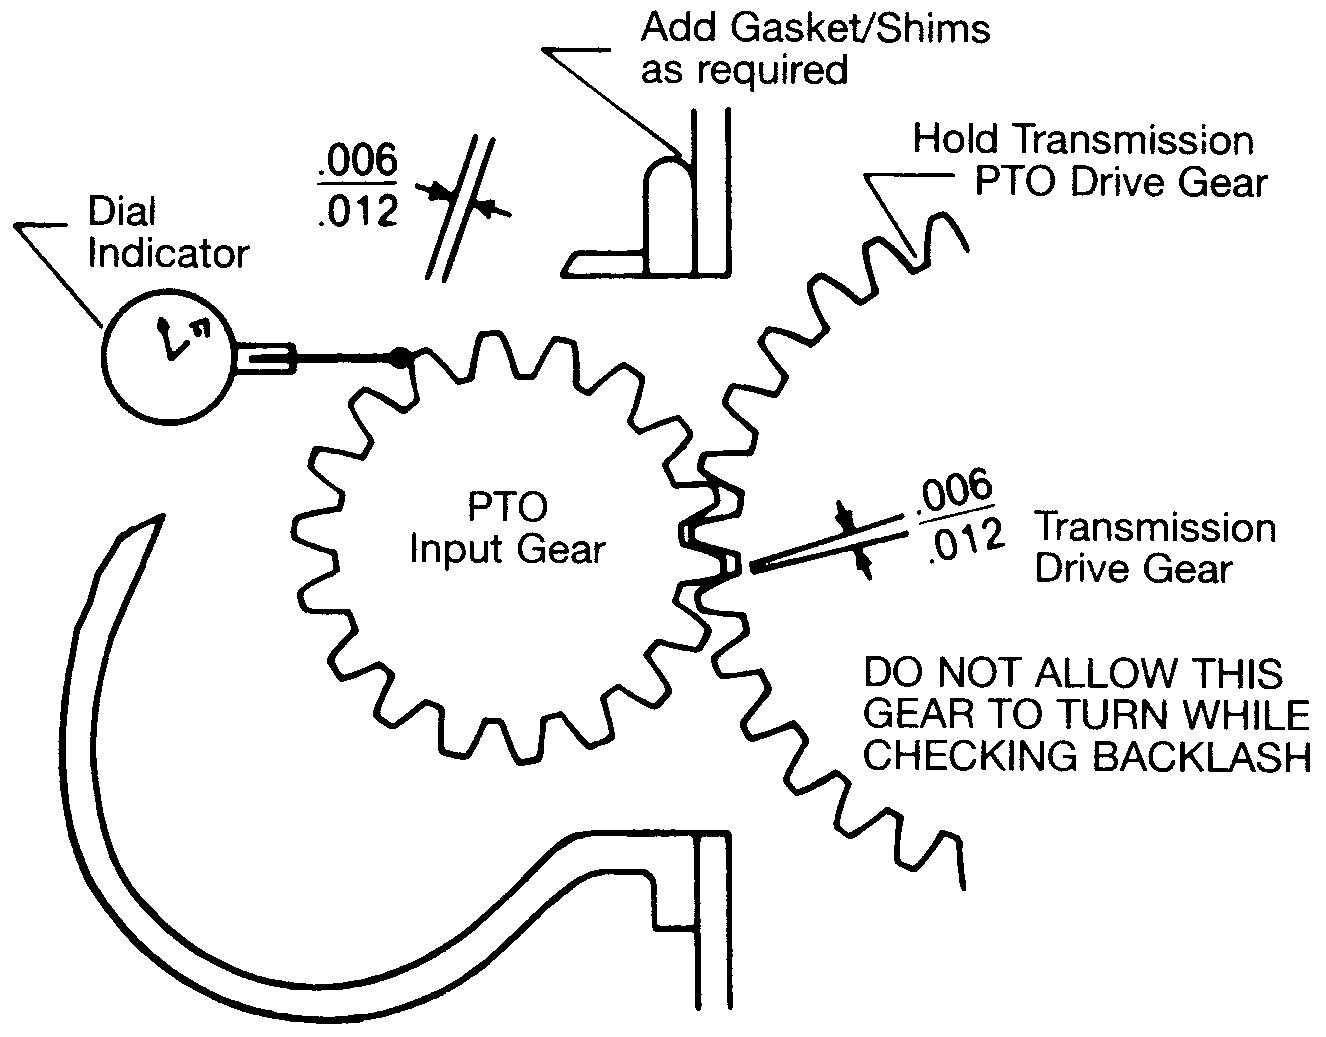 A diagram showing how and where to set backlash in between a PTO and transmission.